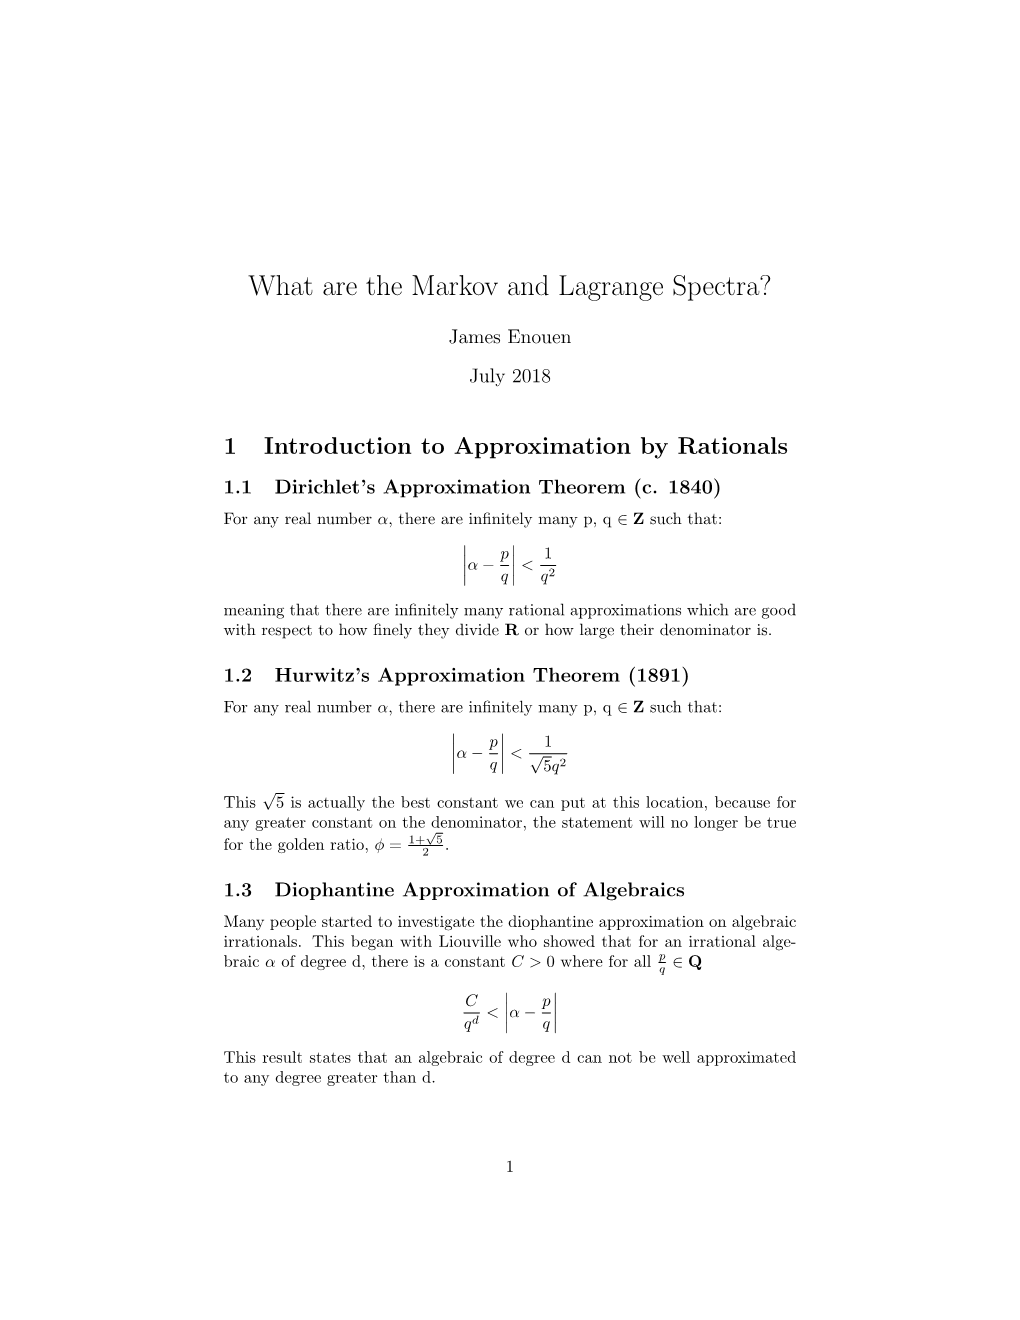 What Are the Markov and Lagrange Spectra?